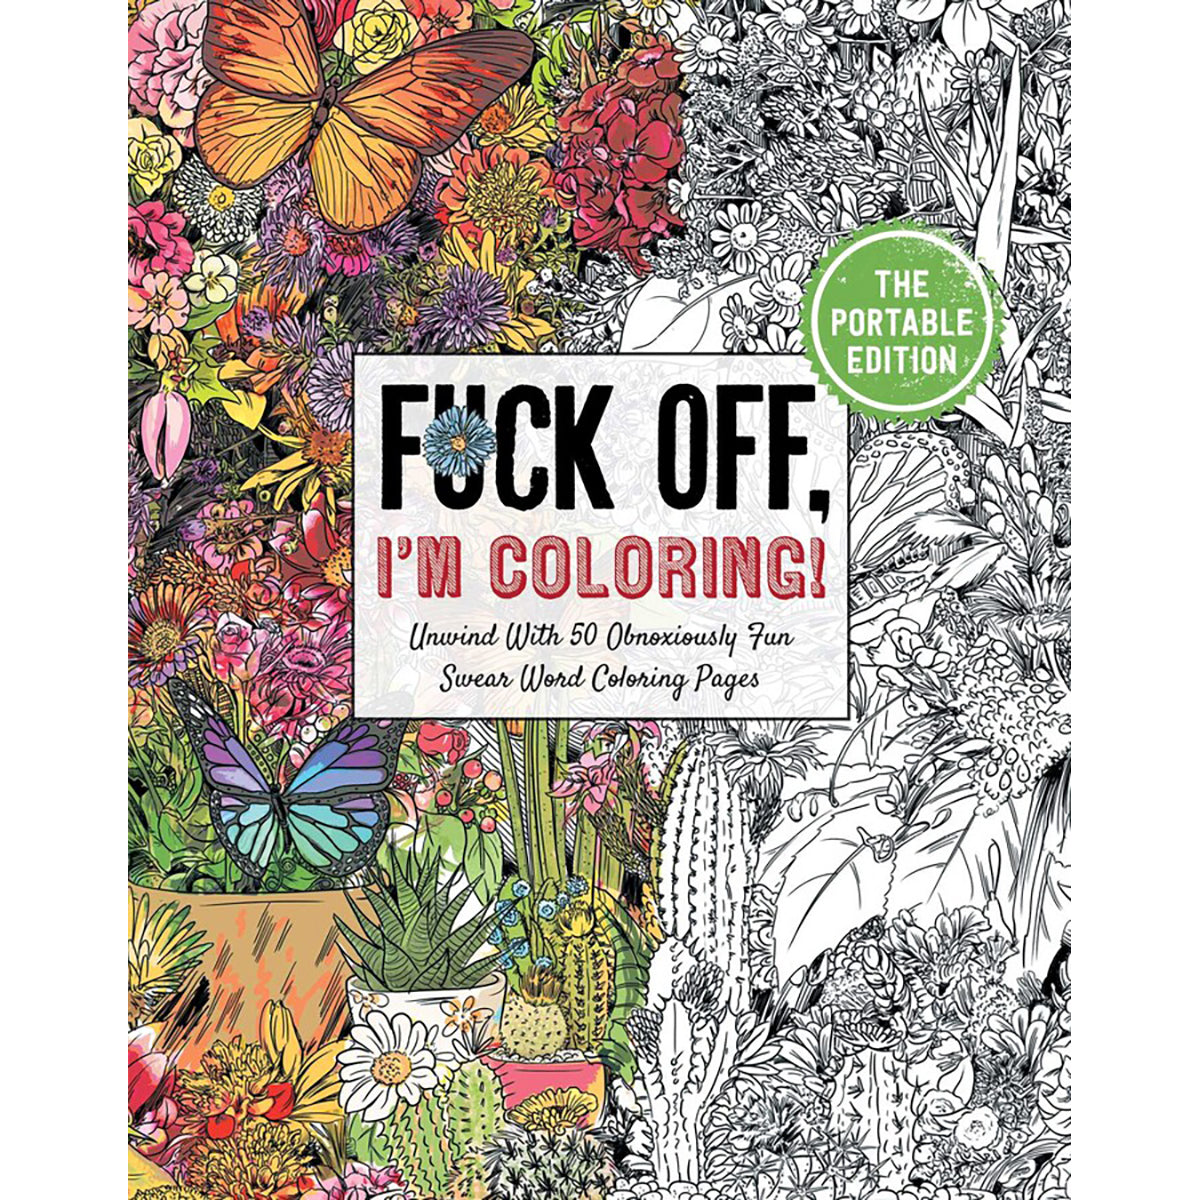 Fuck Off, I'm Coloring Book: The Portable Edition